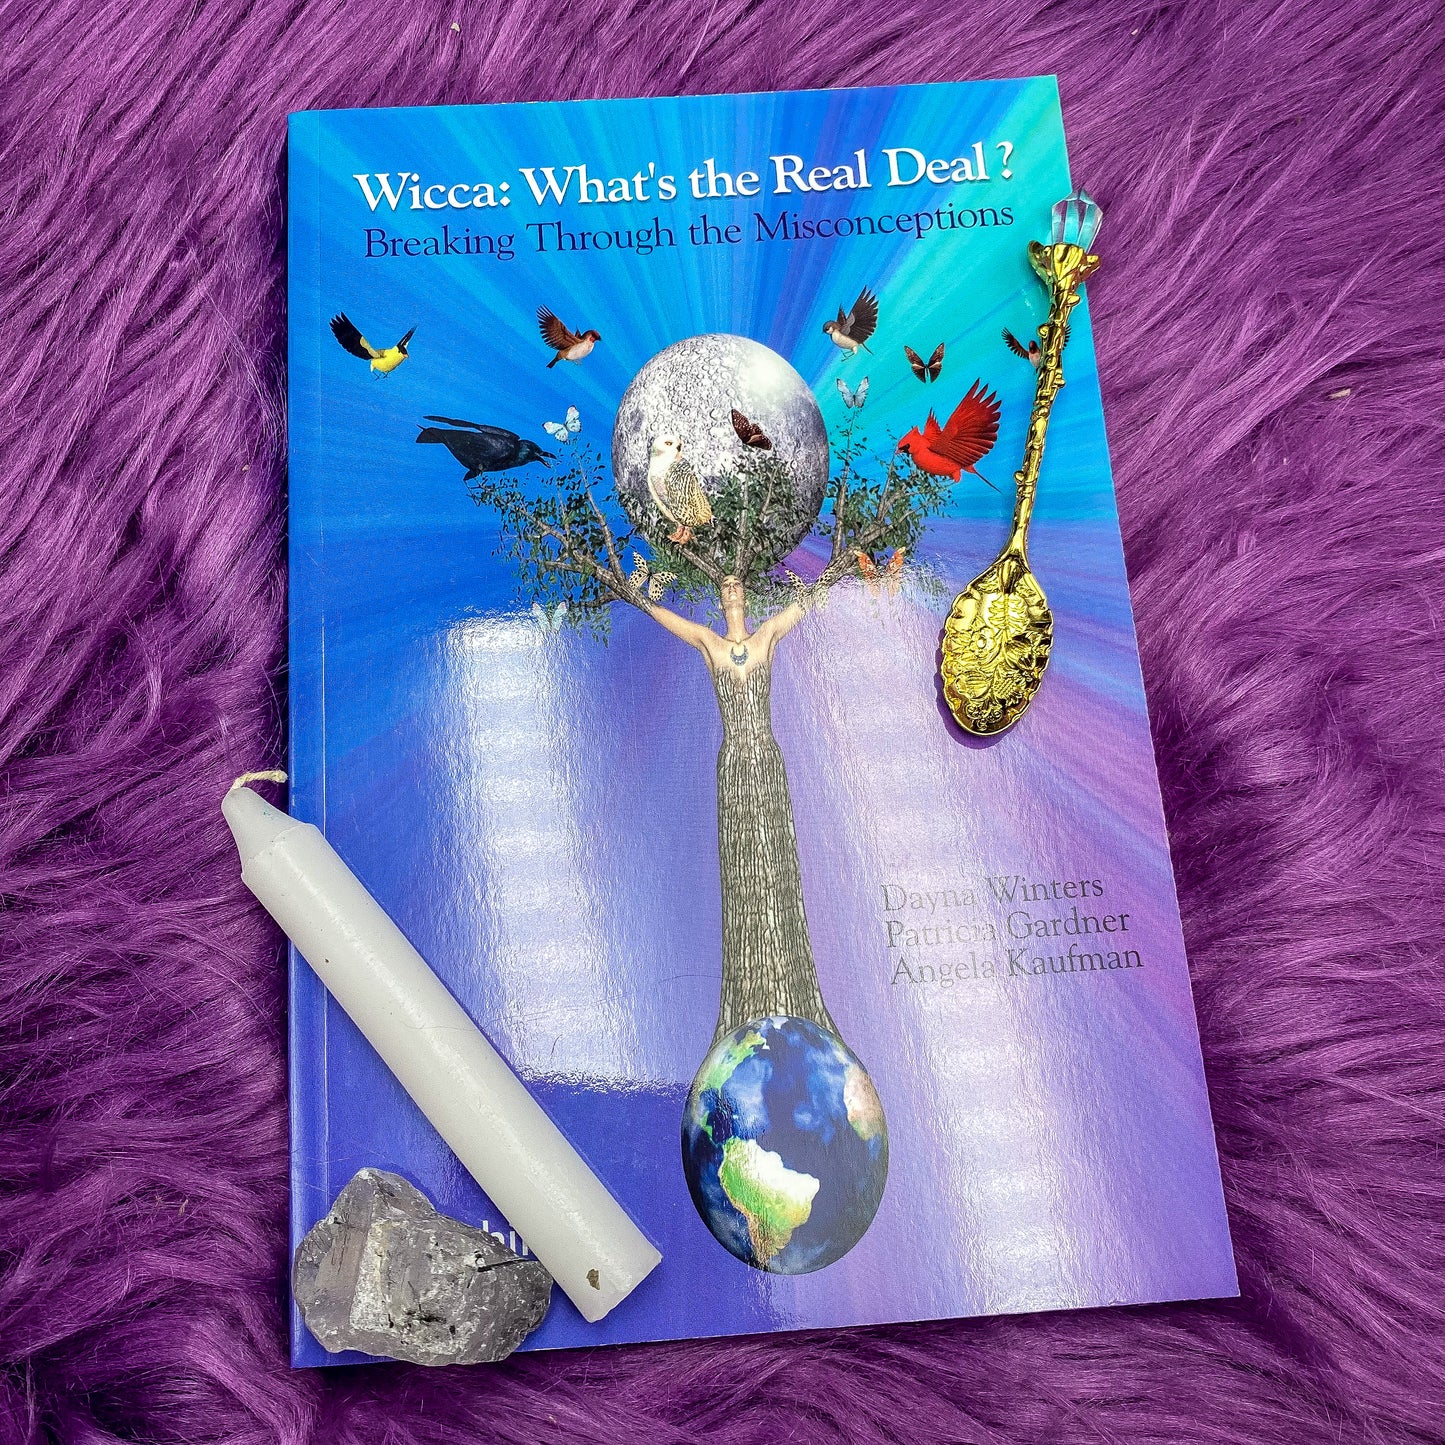 Wicca: What's the Real Deal?: Breaking through the Misconceptions by Dayna Winters